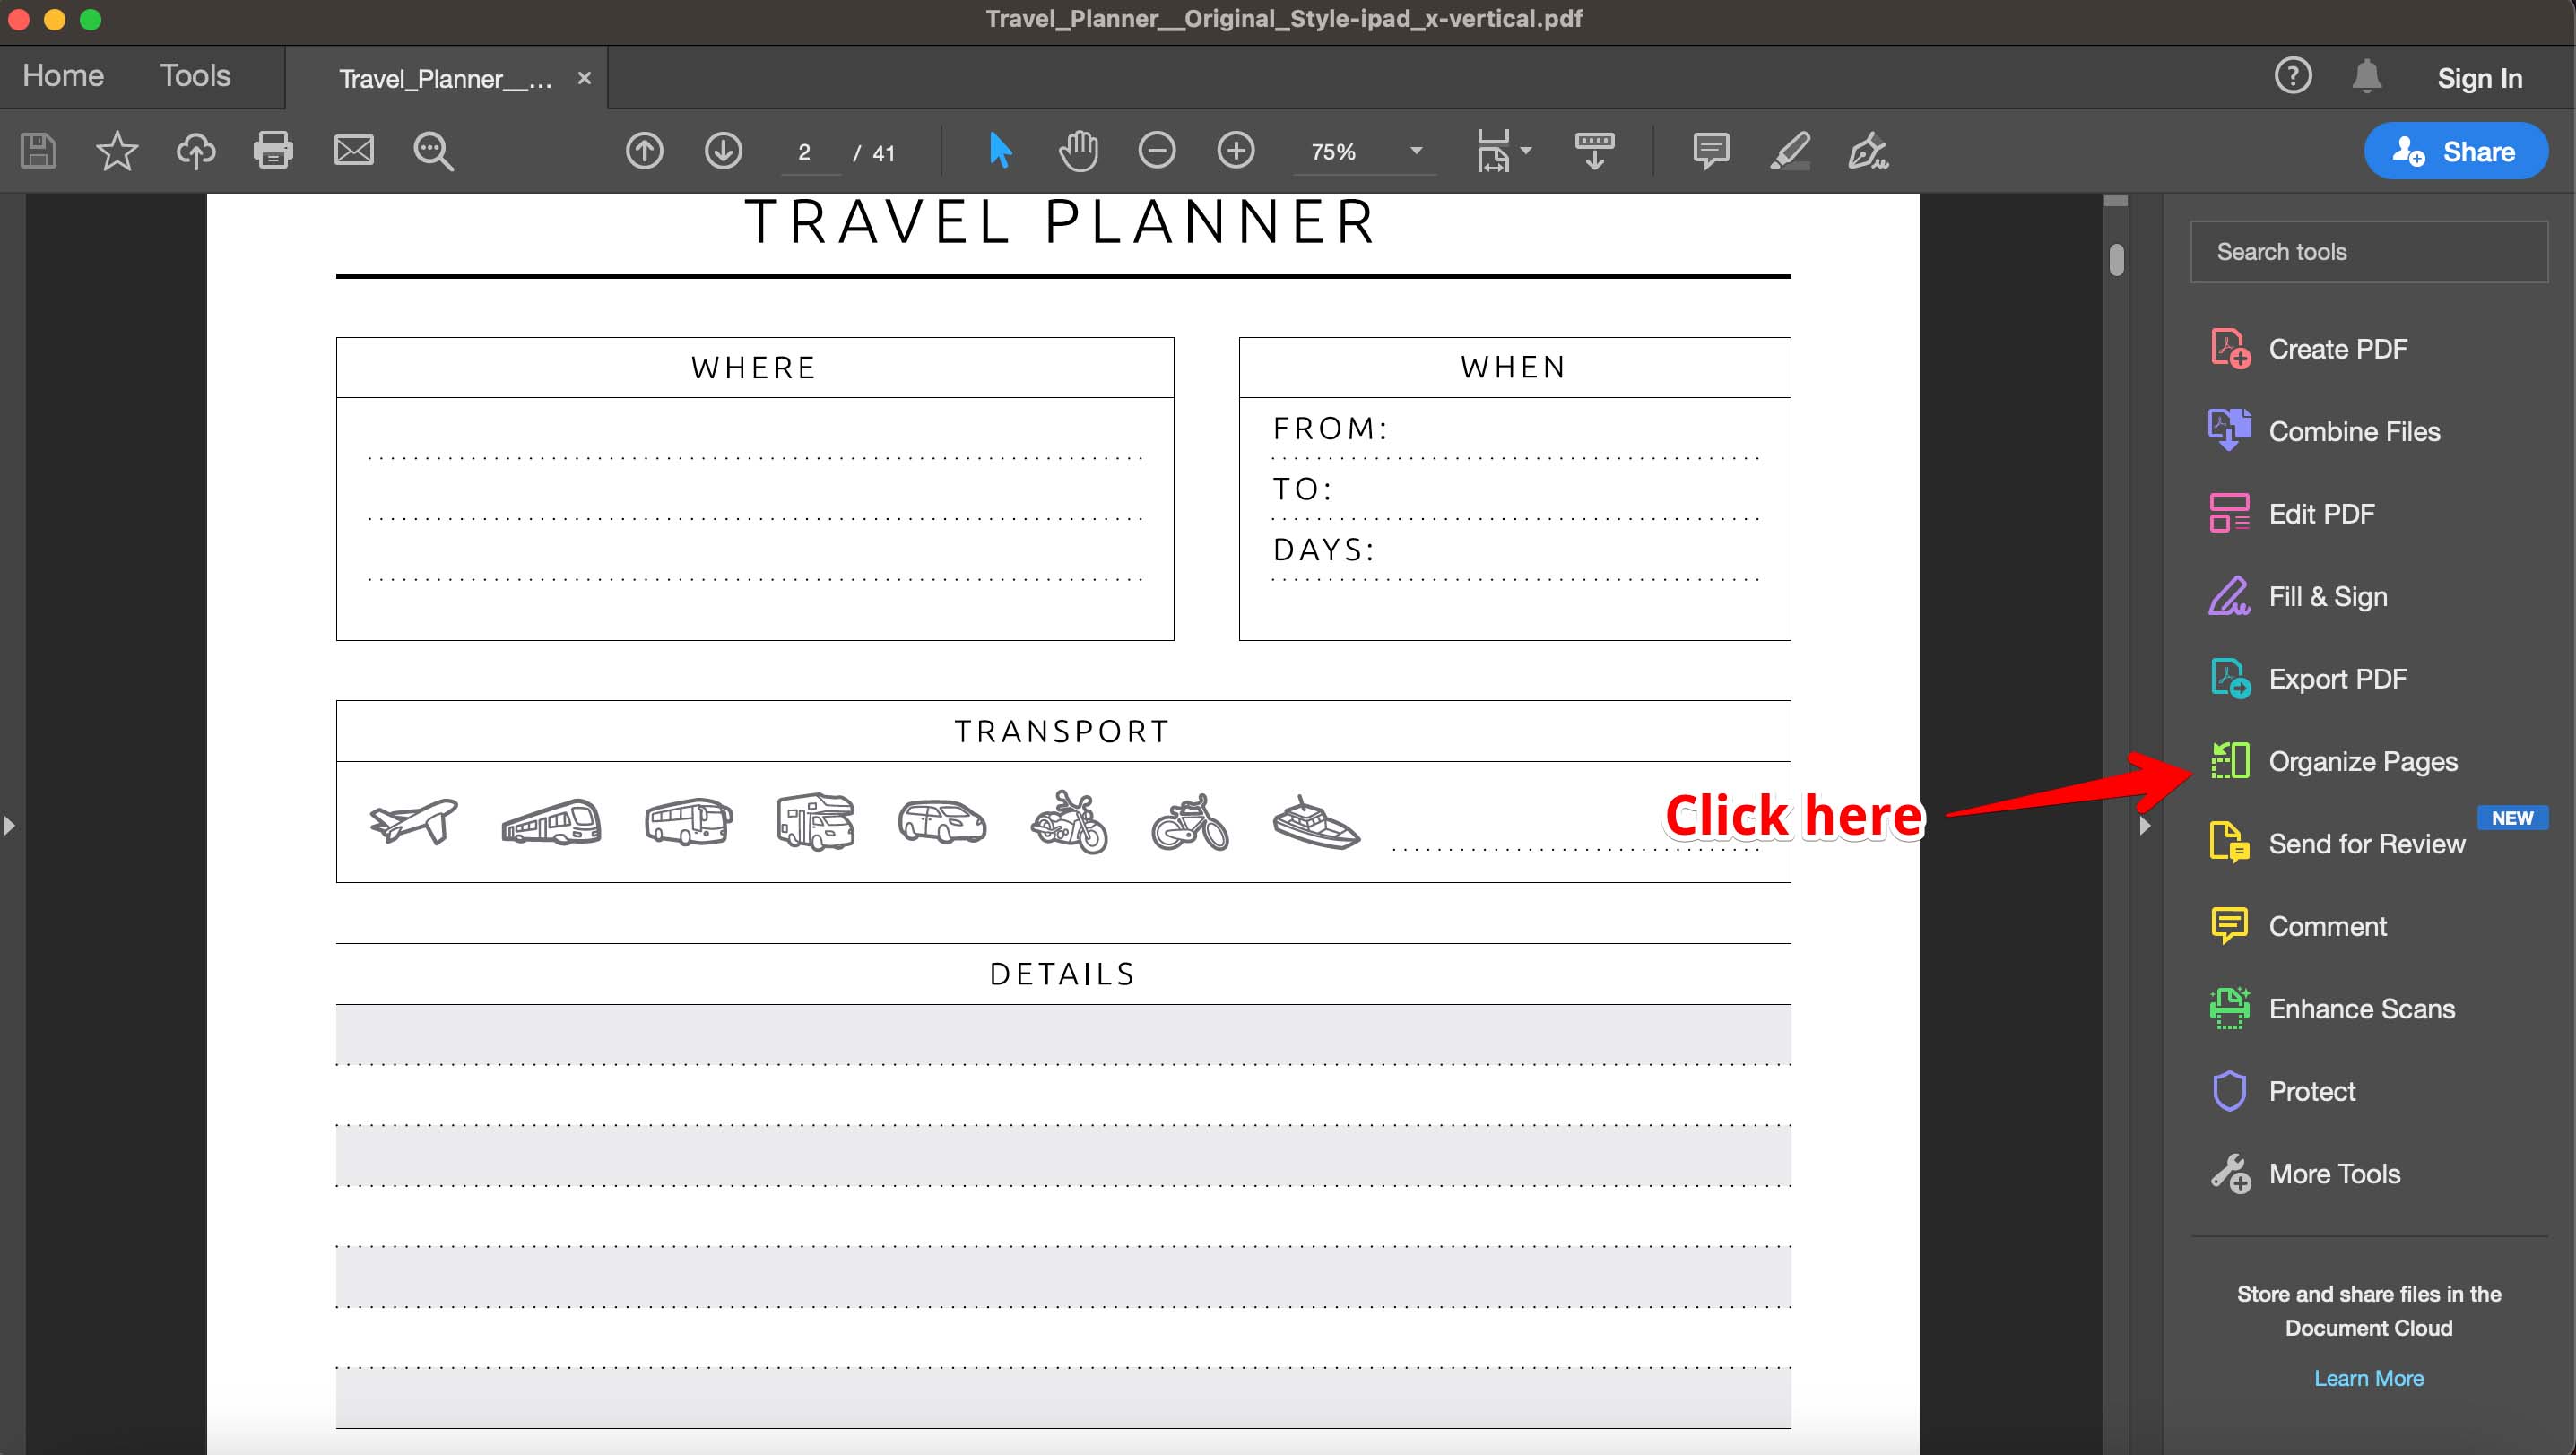 Navigate to the Organize Pages tool in Adobe Acrobat